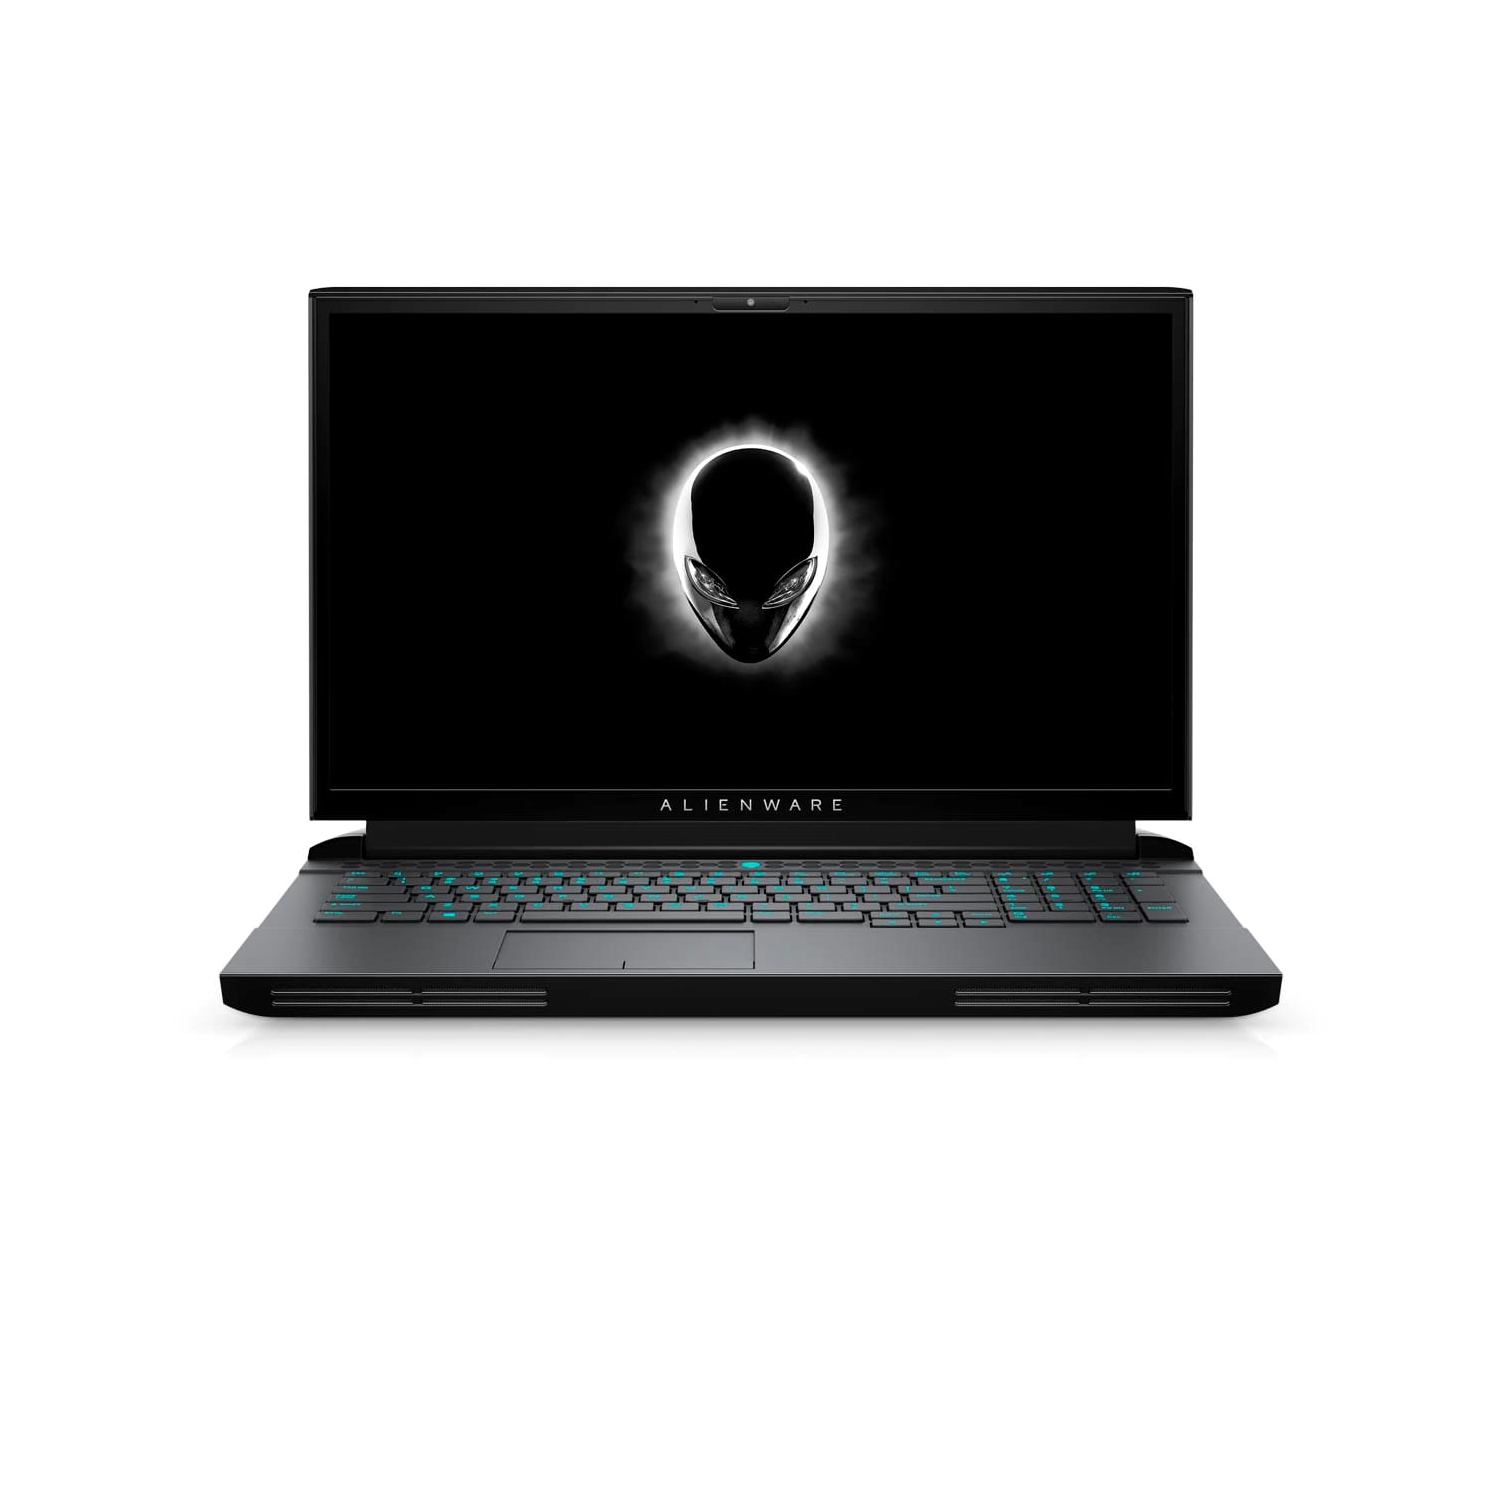 Refurbished (Excellent) - Dell Alienware 17 51m R2 Gaming Laptop (2020), 17.3" FHD, Core i7 - 1TB SSD + 1TB SSD - 32GB RAM - 2070 Super, 5.1 GHz - 10th Gen CPU Certified